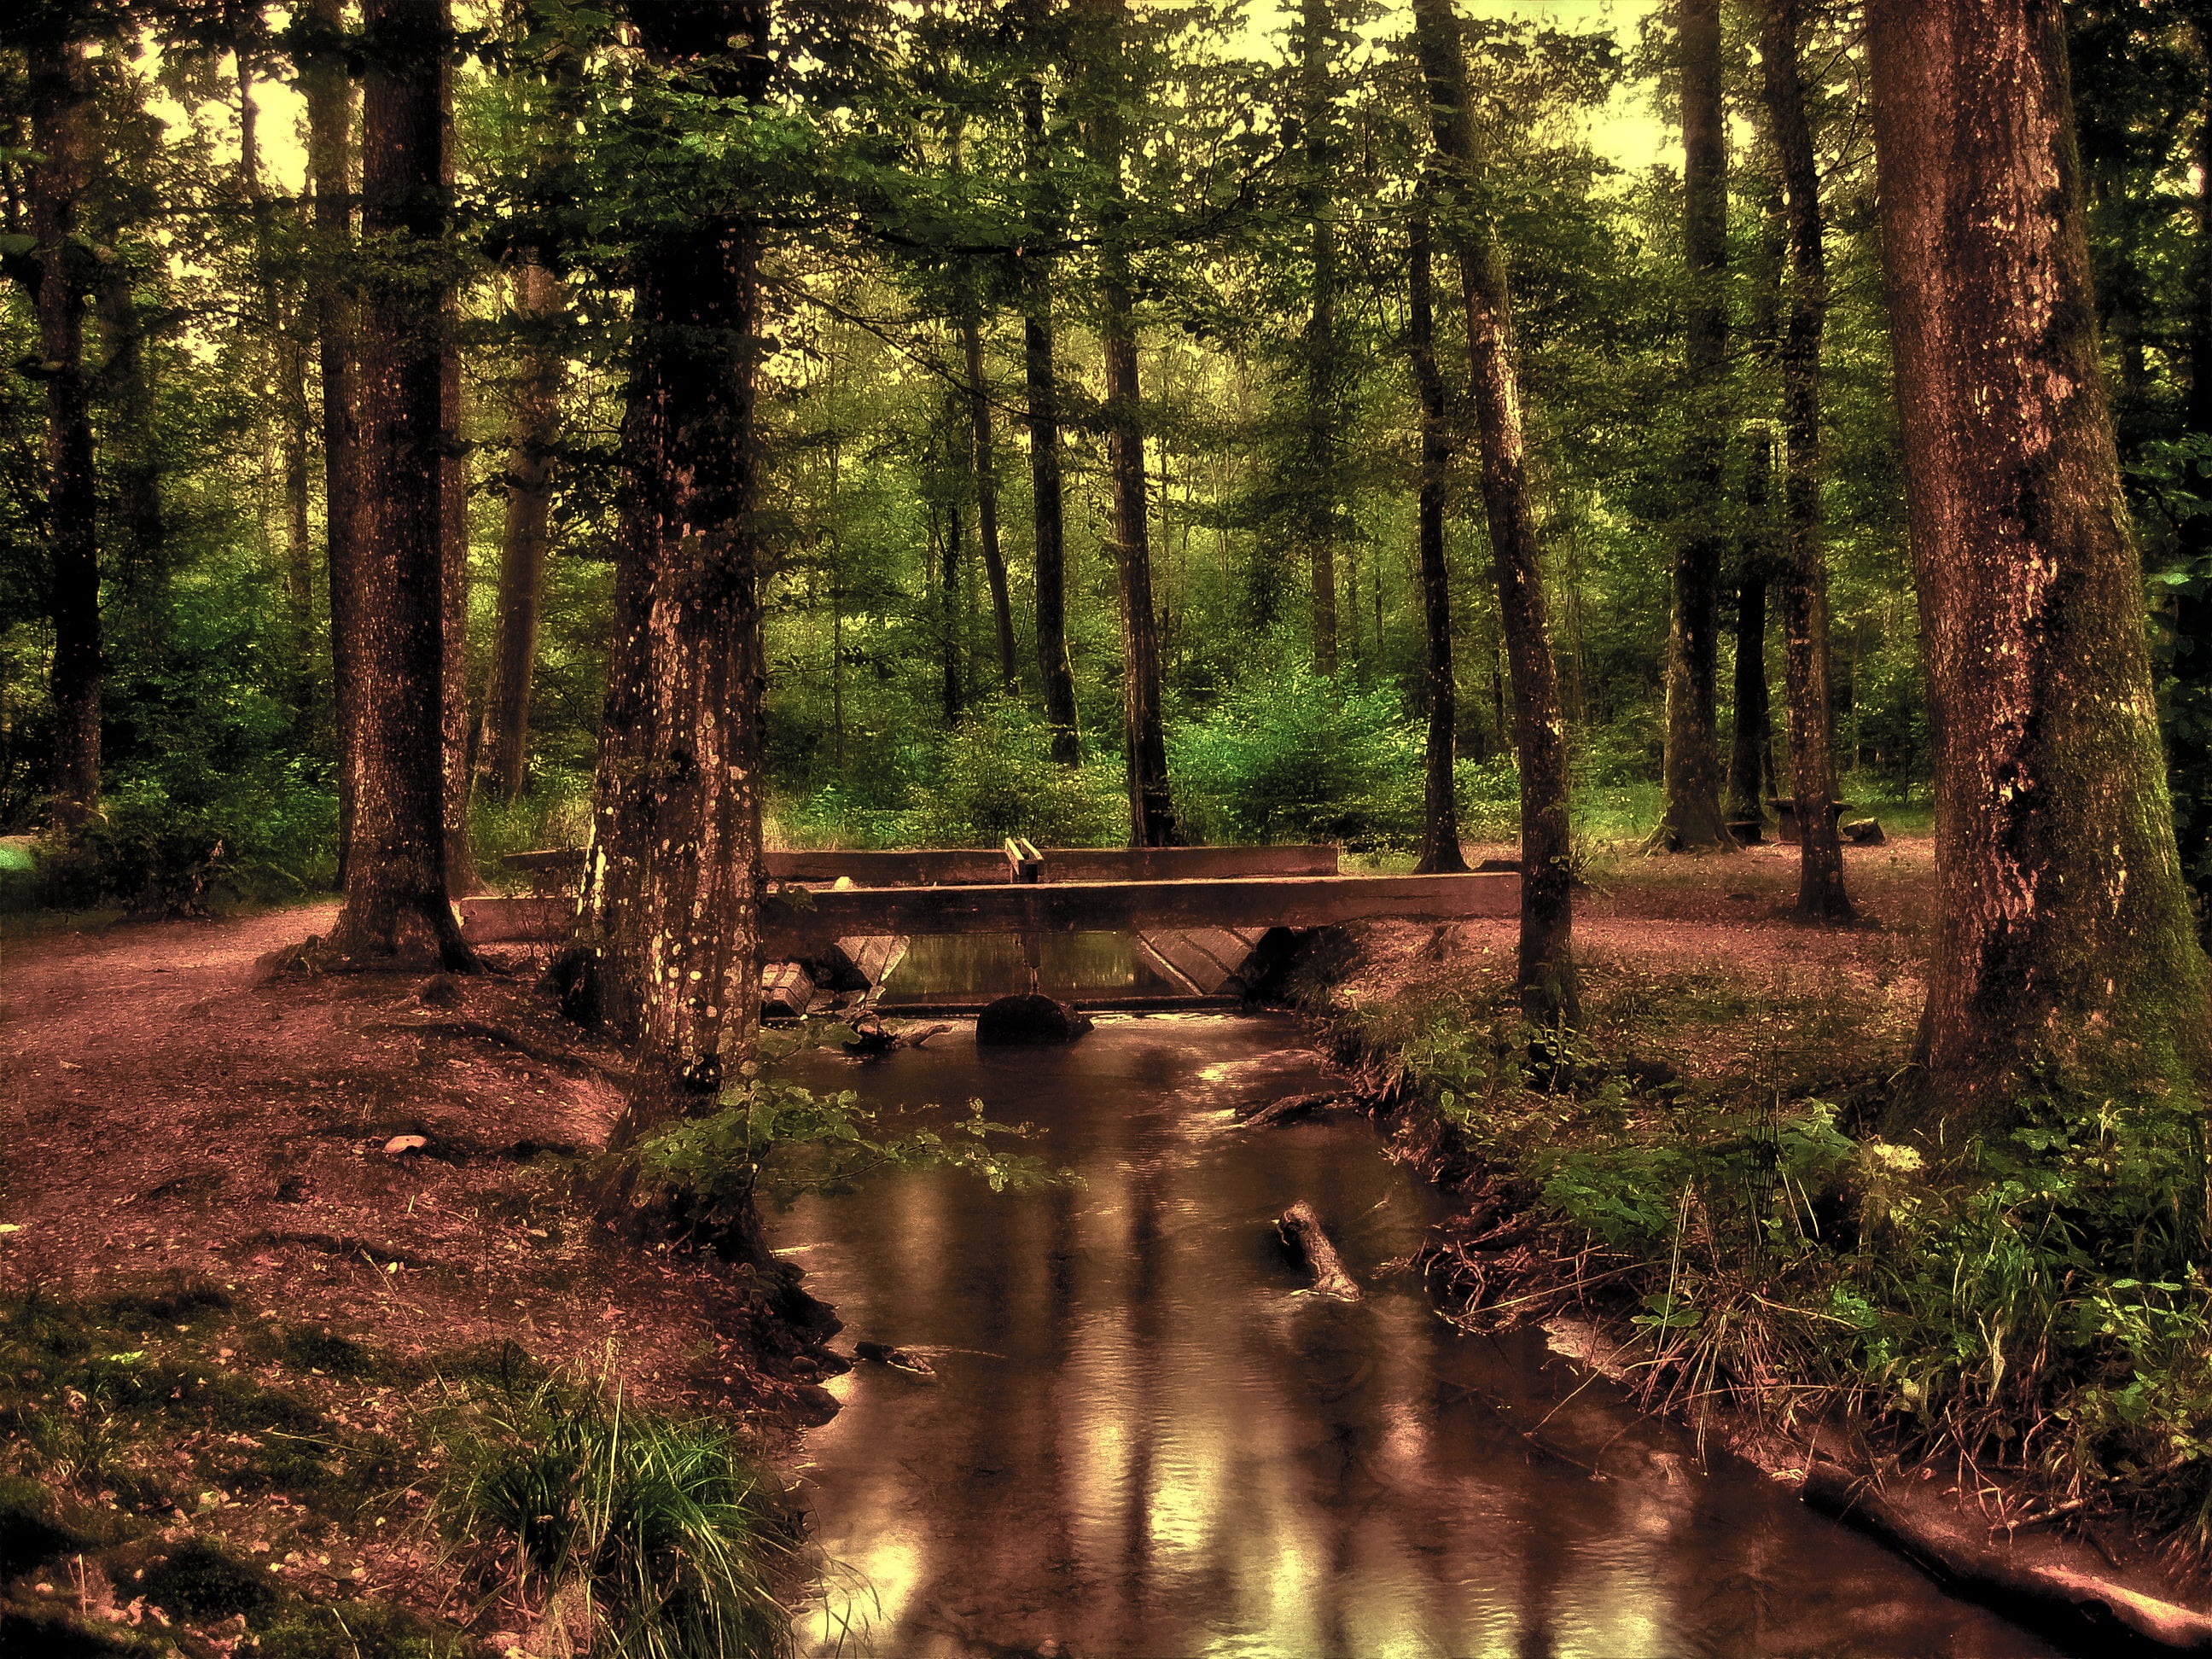 water stream on middle of forest